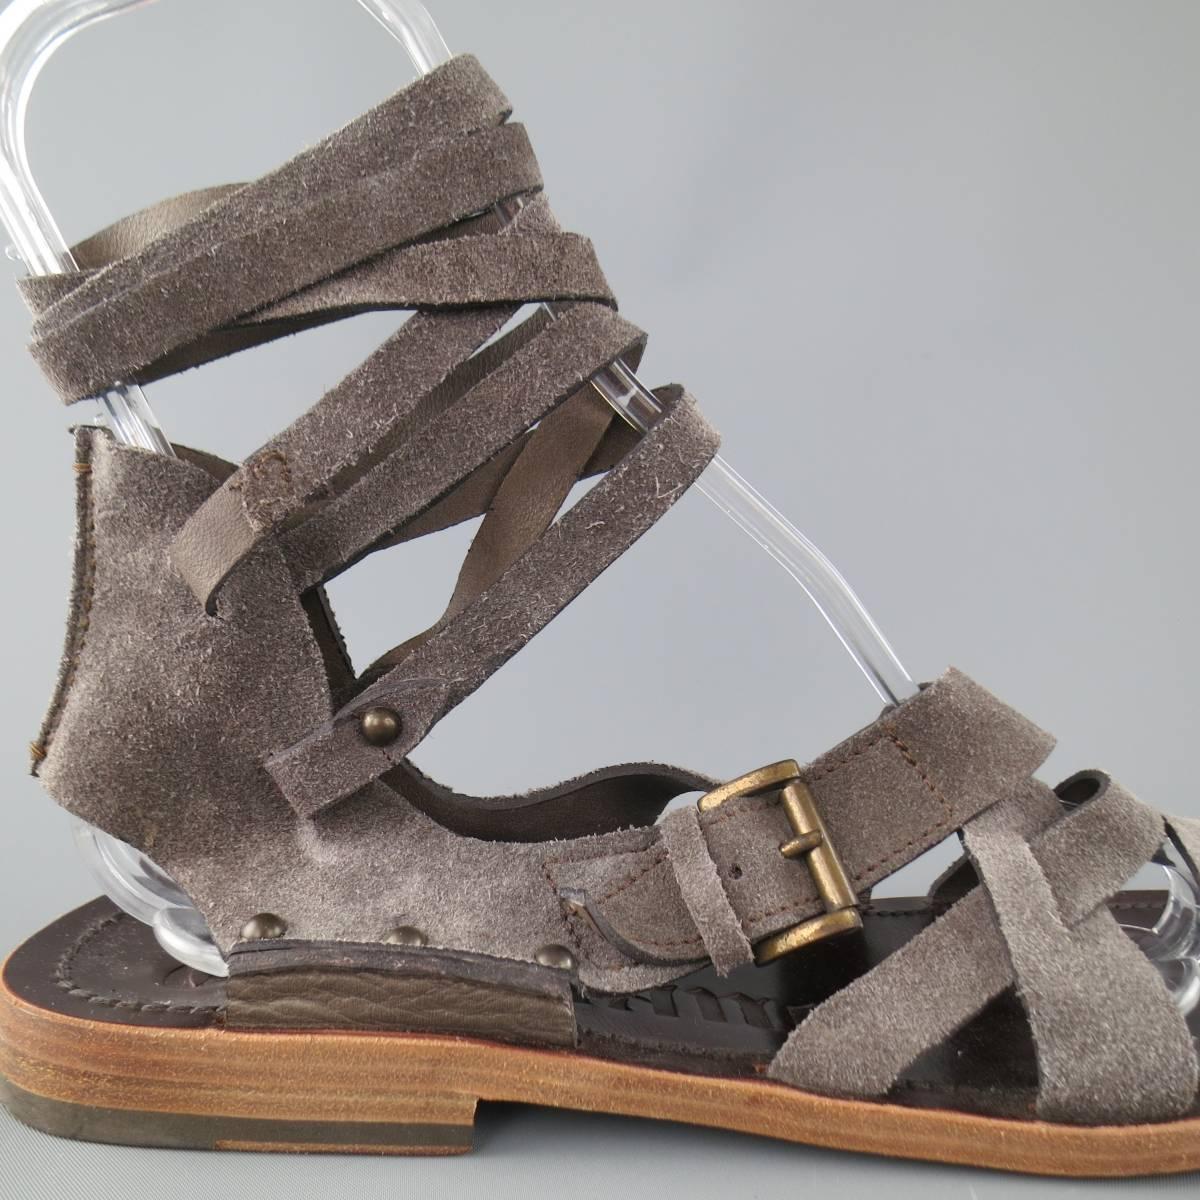 JOHN GALLIANO gladiator sandals feature light gray strappy front with a long wrapped ankle strap. Made in Italy.
 
Good Pre-Owned Condition.
Marked: 42


Web ID: 77989 
